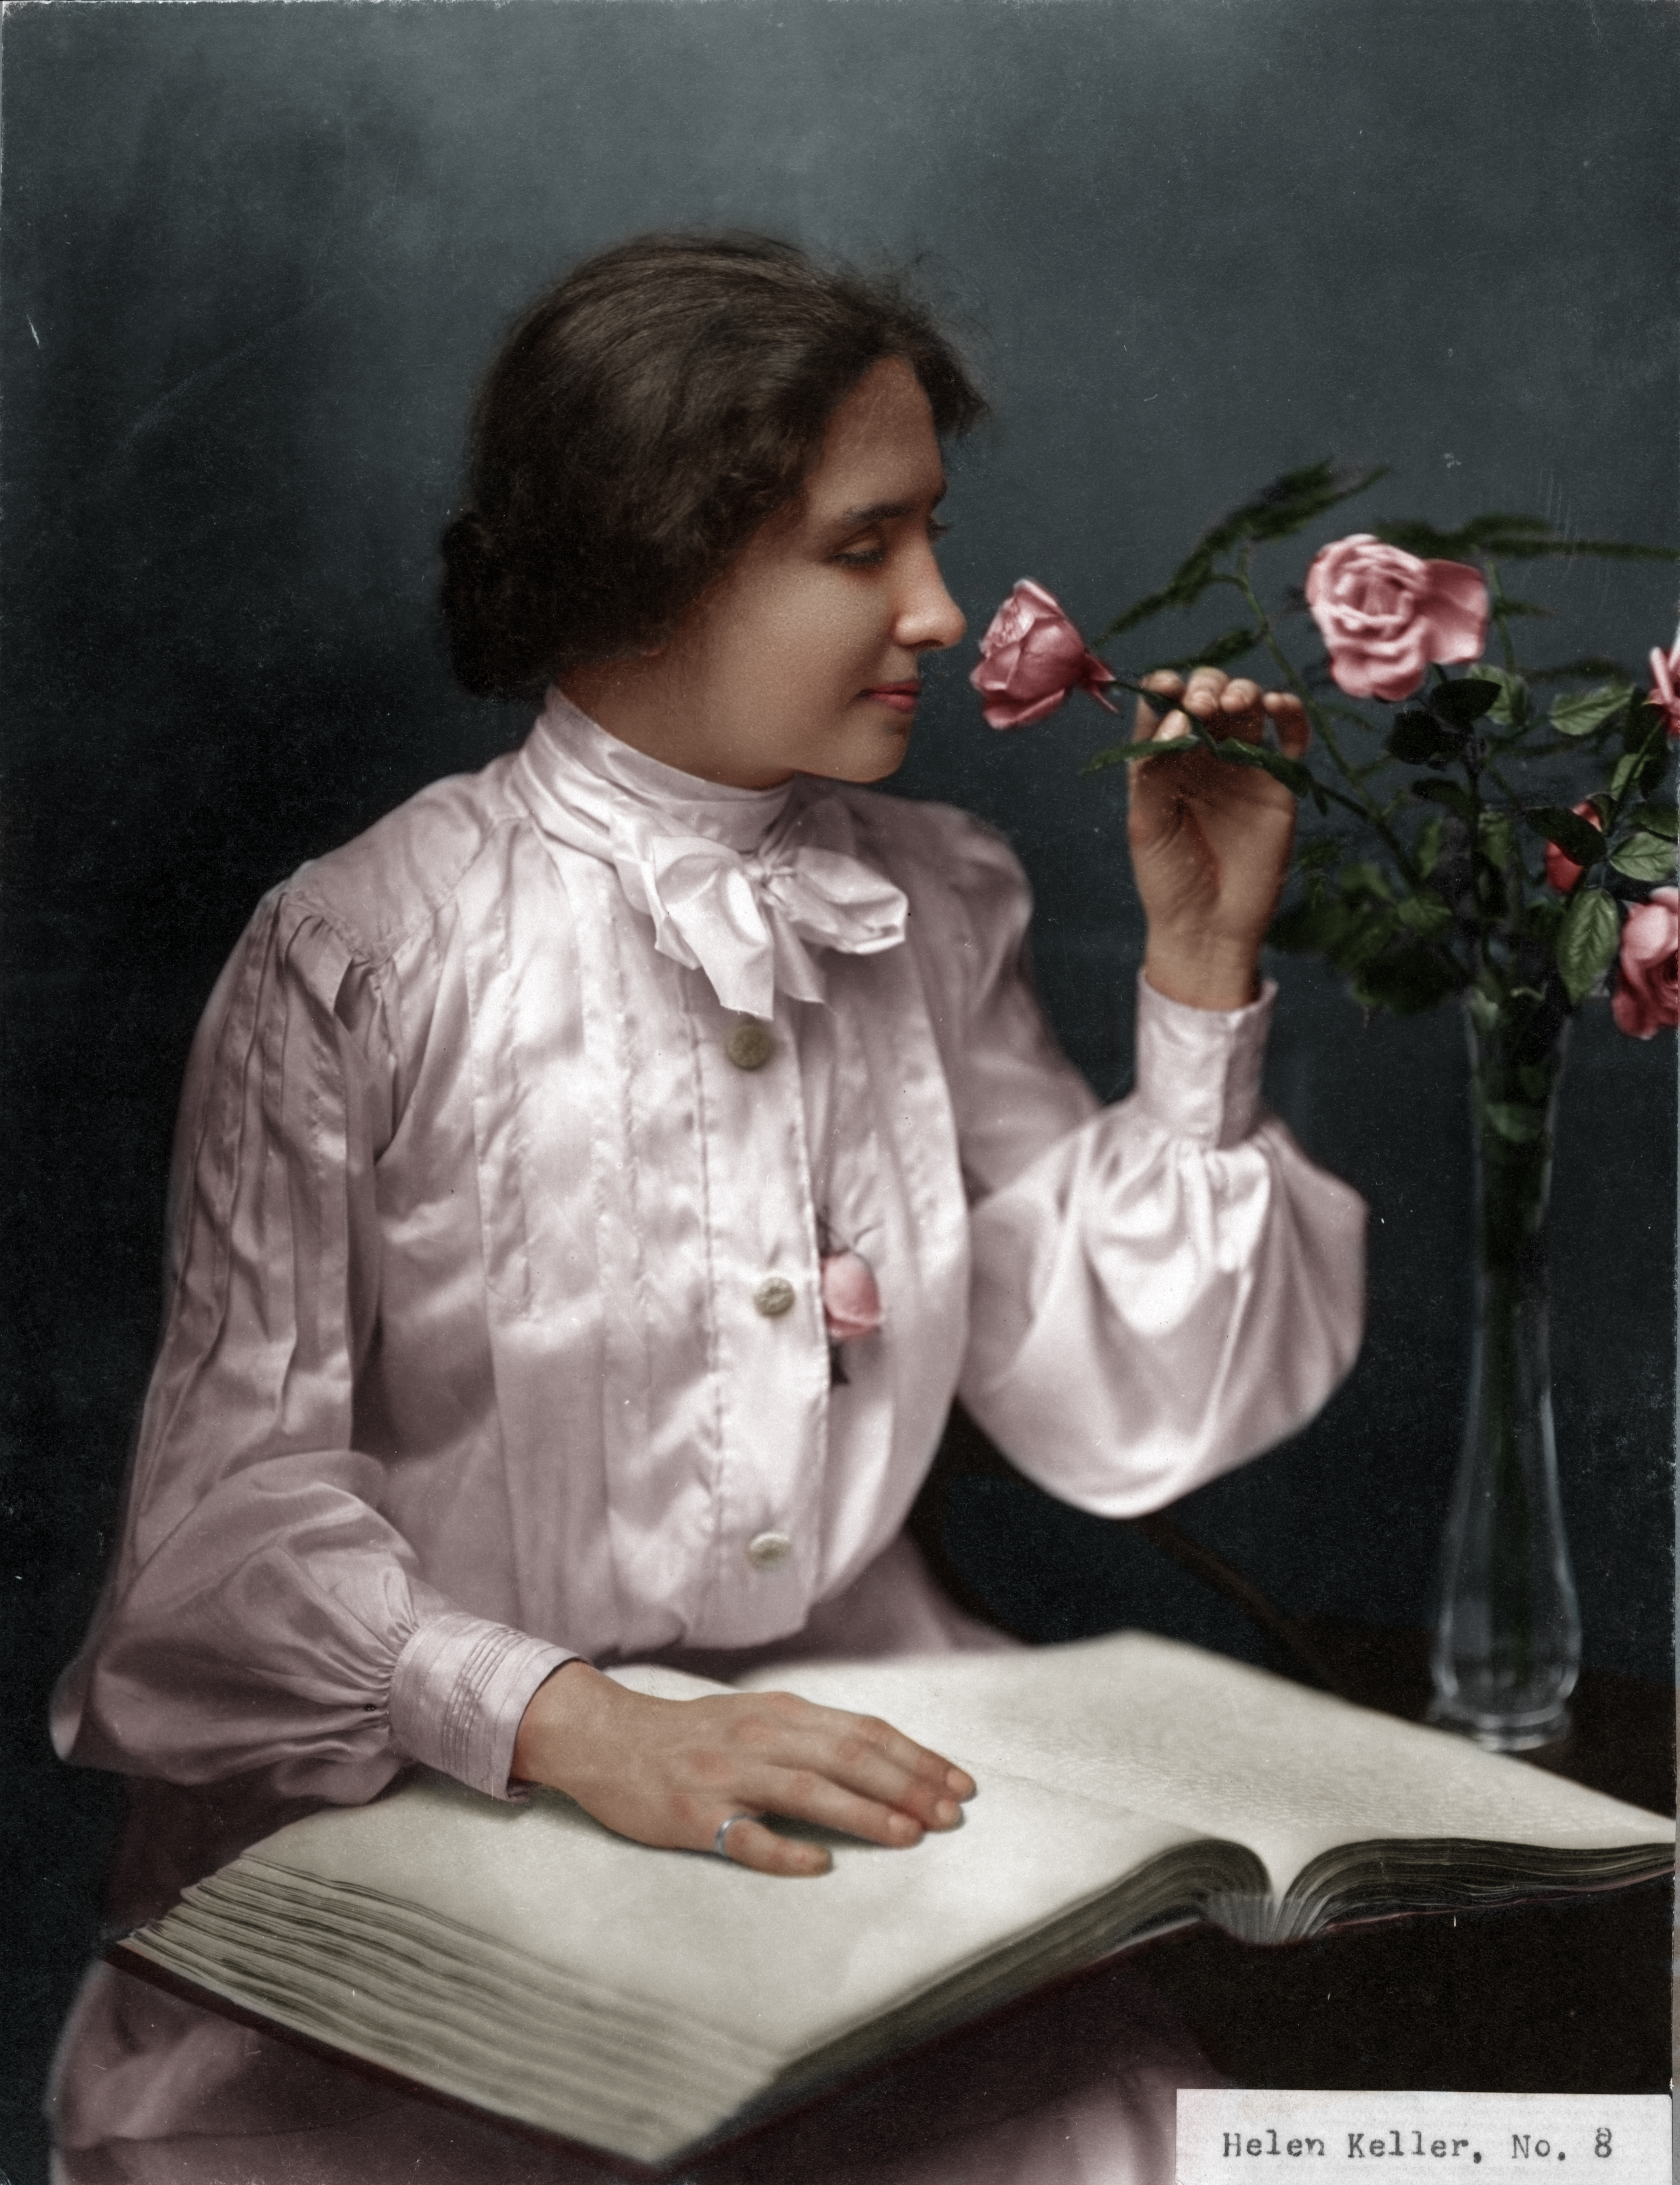 A painting of Helen Keller in a white blouse smelling a pink rose.